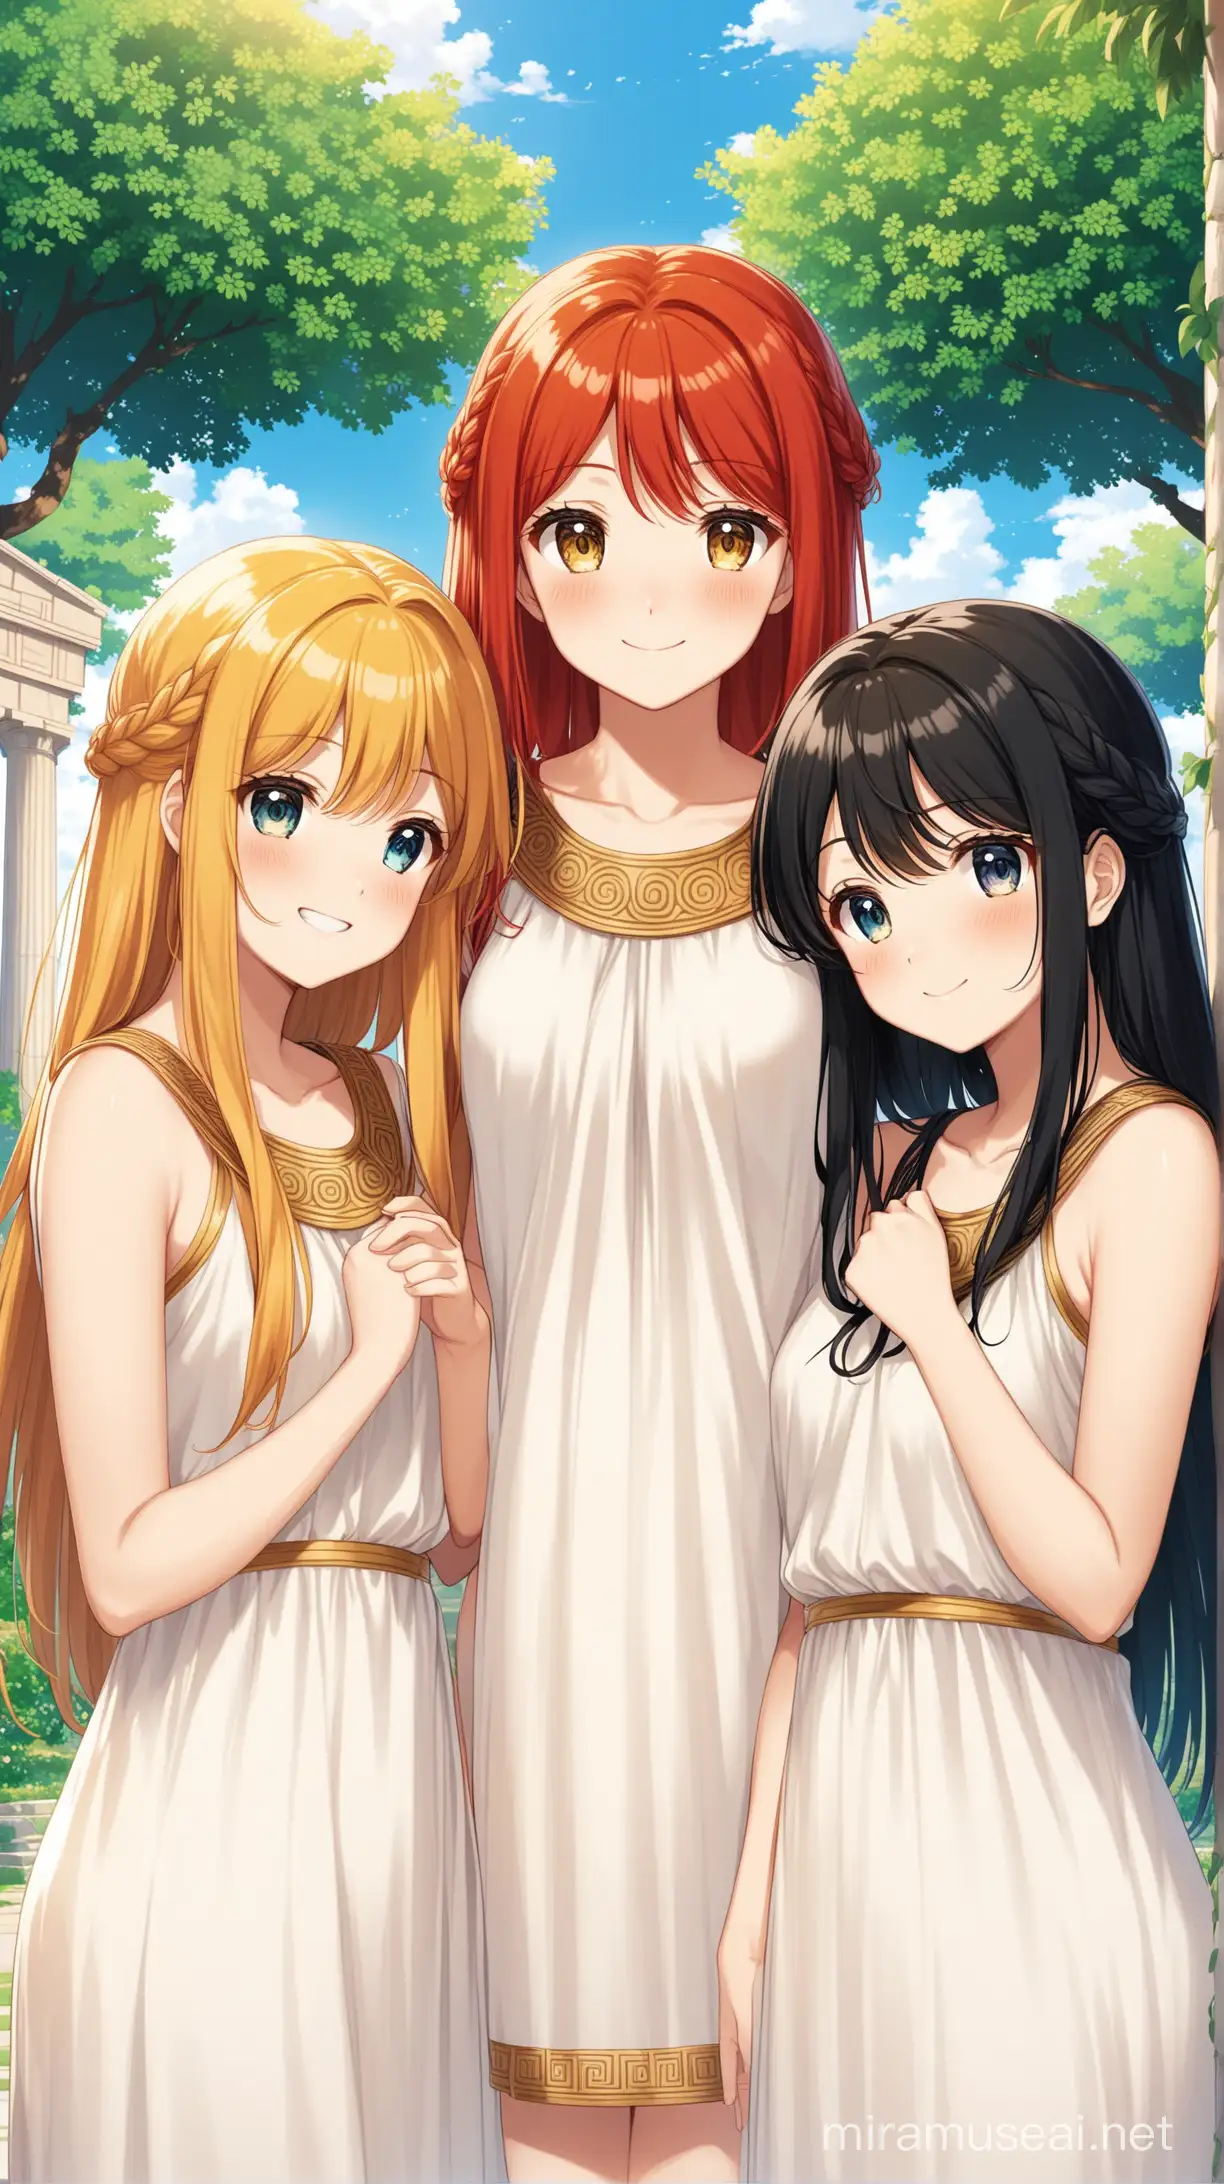 Three Anime Girls in Greek Chitons Pose in an Ancient Greek Garden